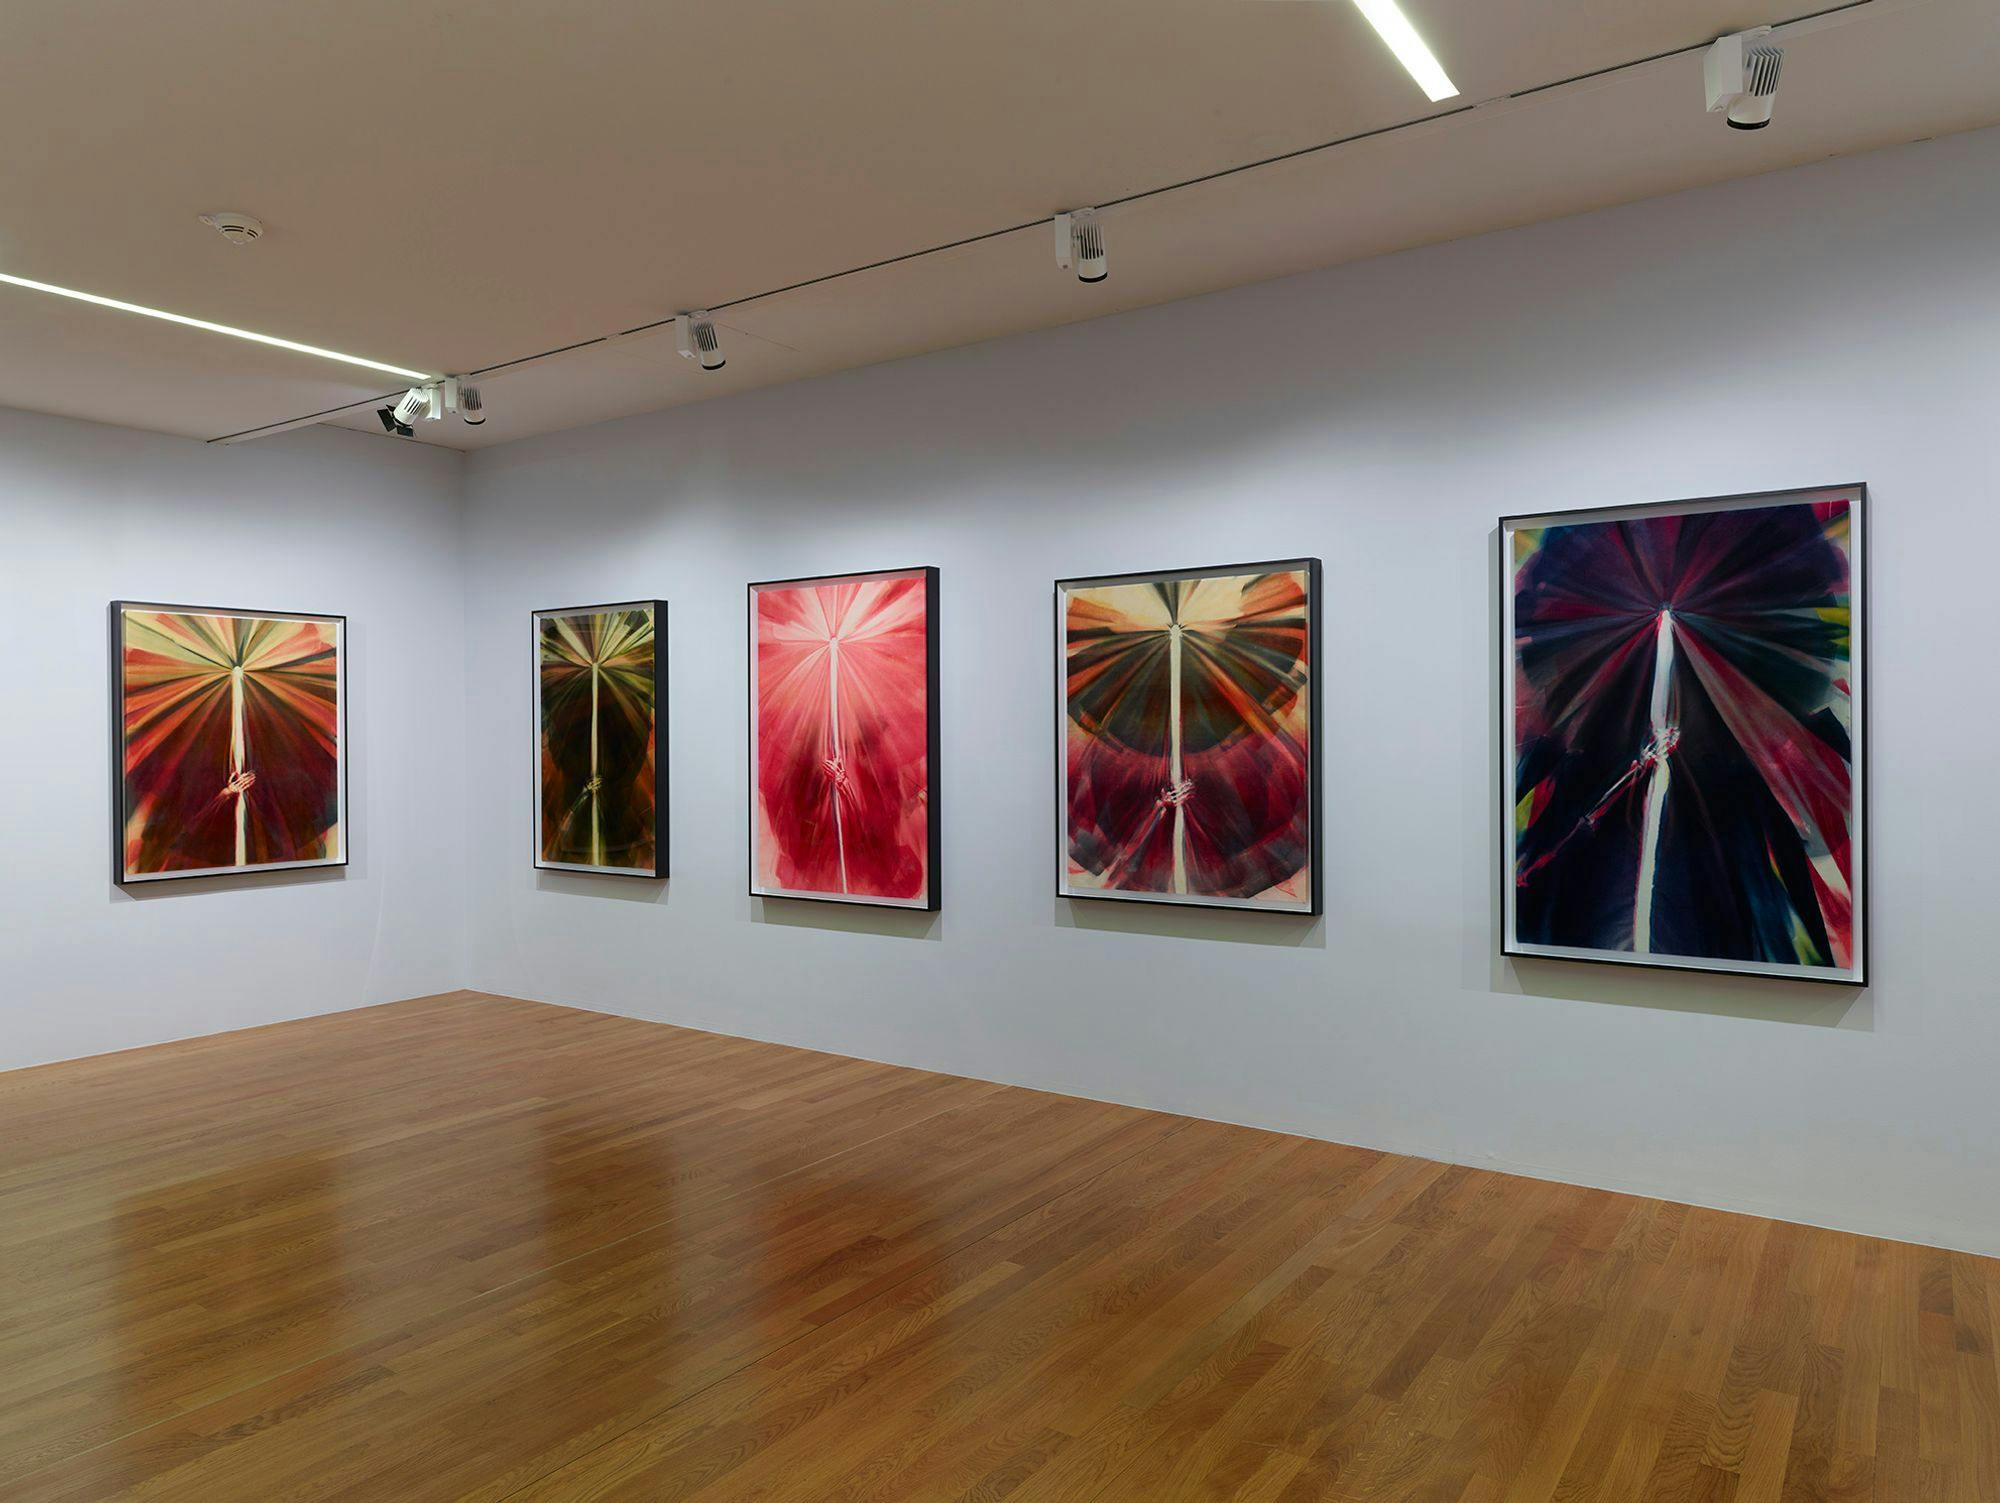 An installation view of works on paper by Andra Ursuța on view at Fondation Vincent van Gogh Arles, France